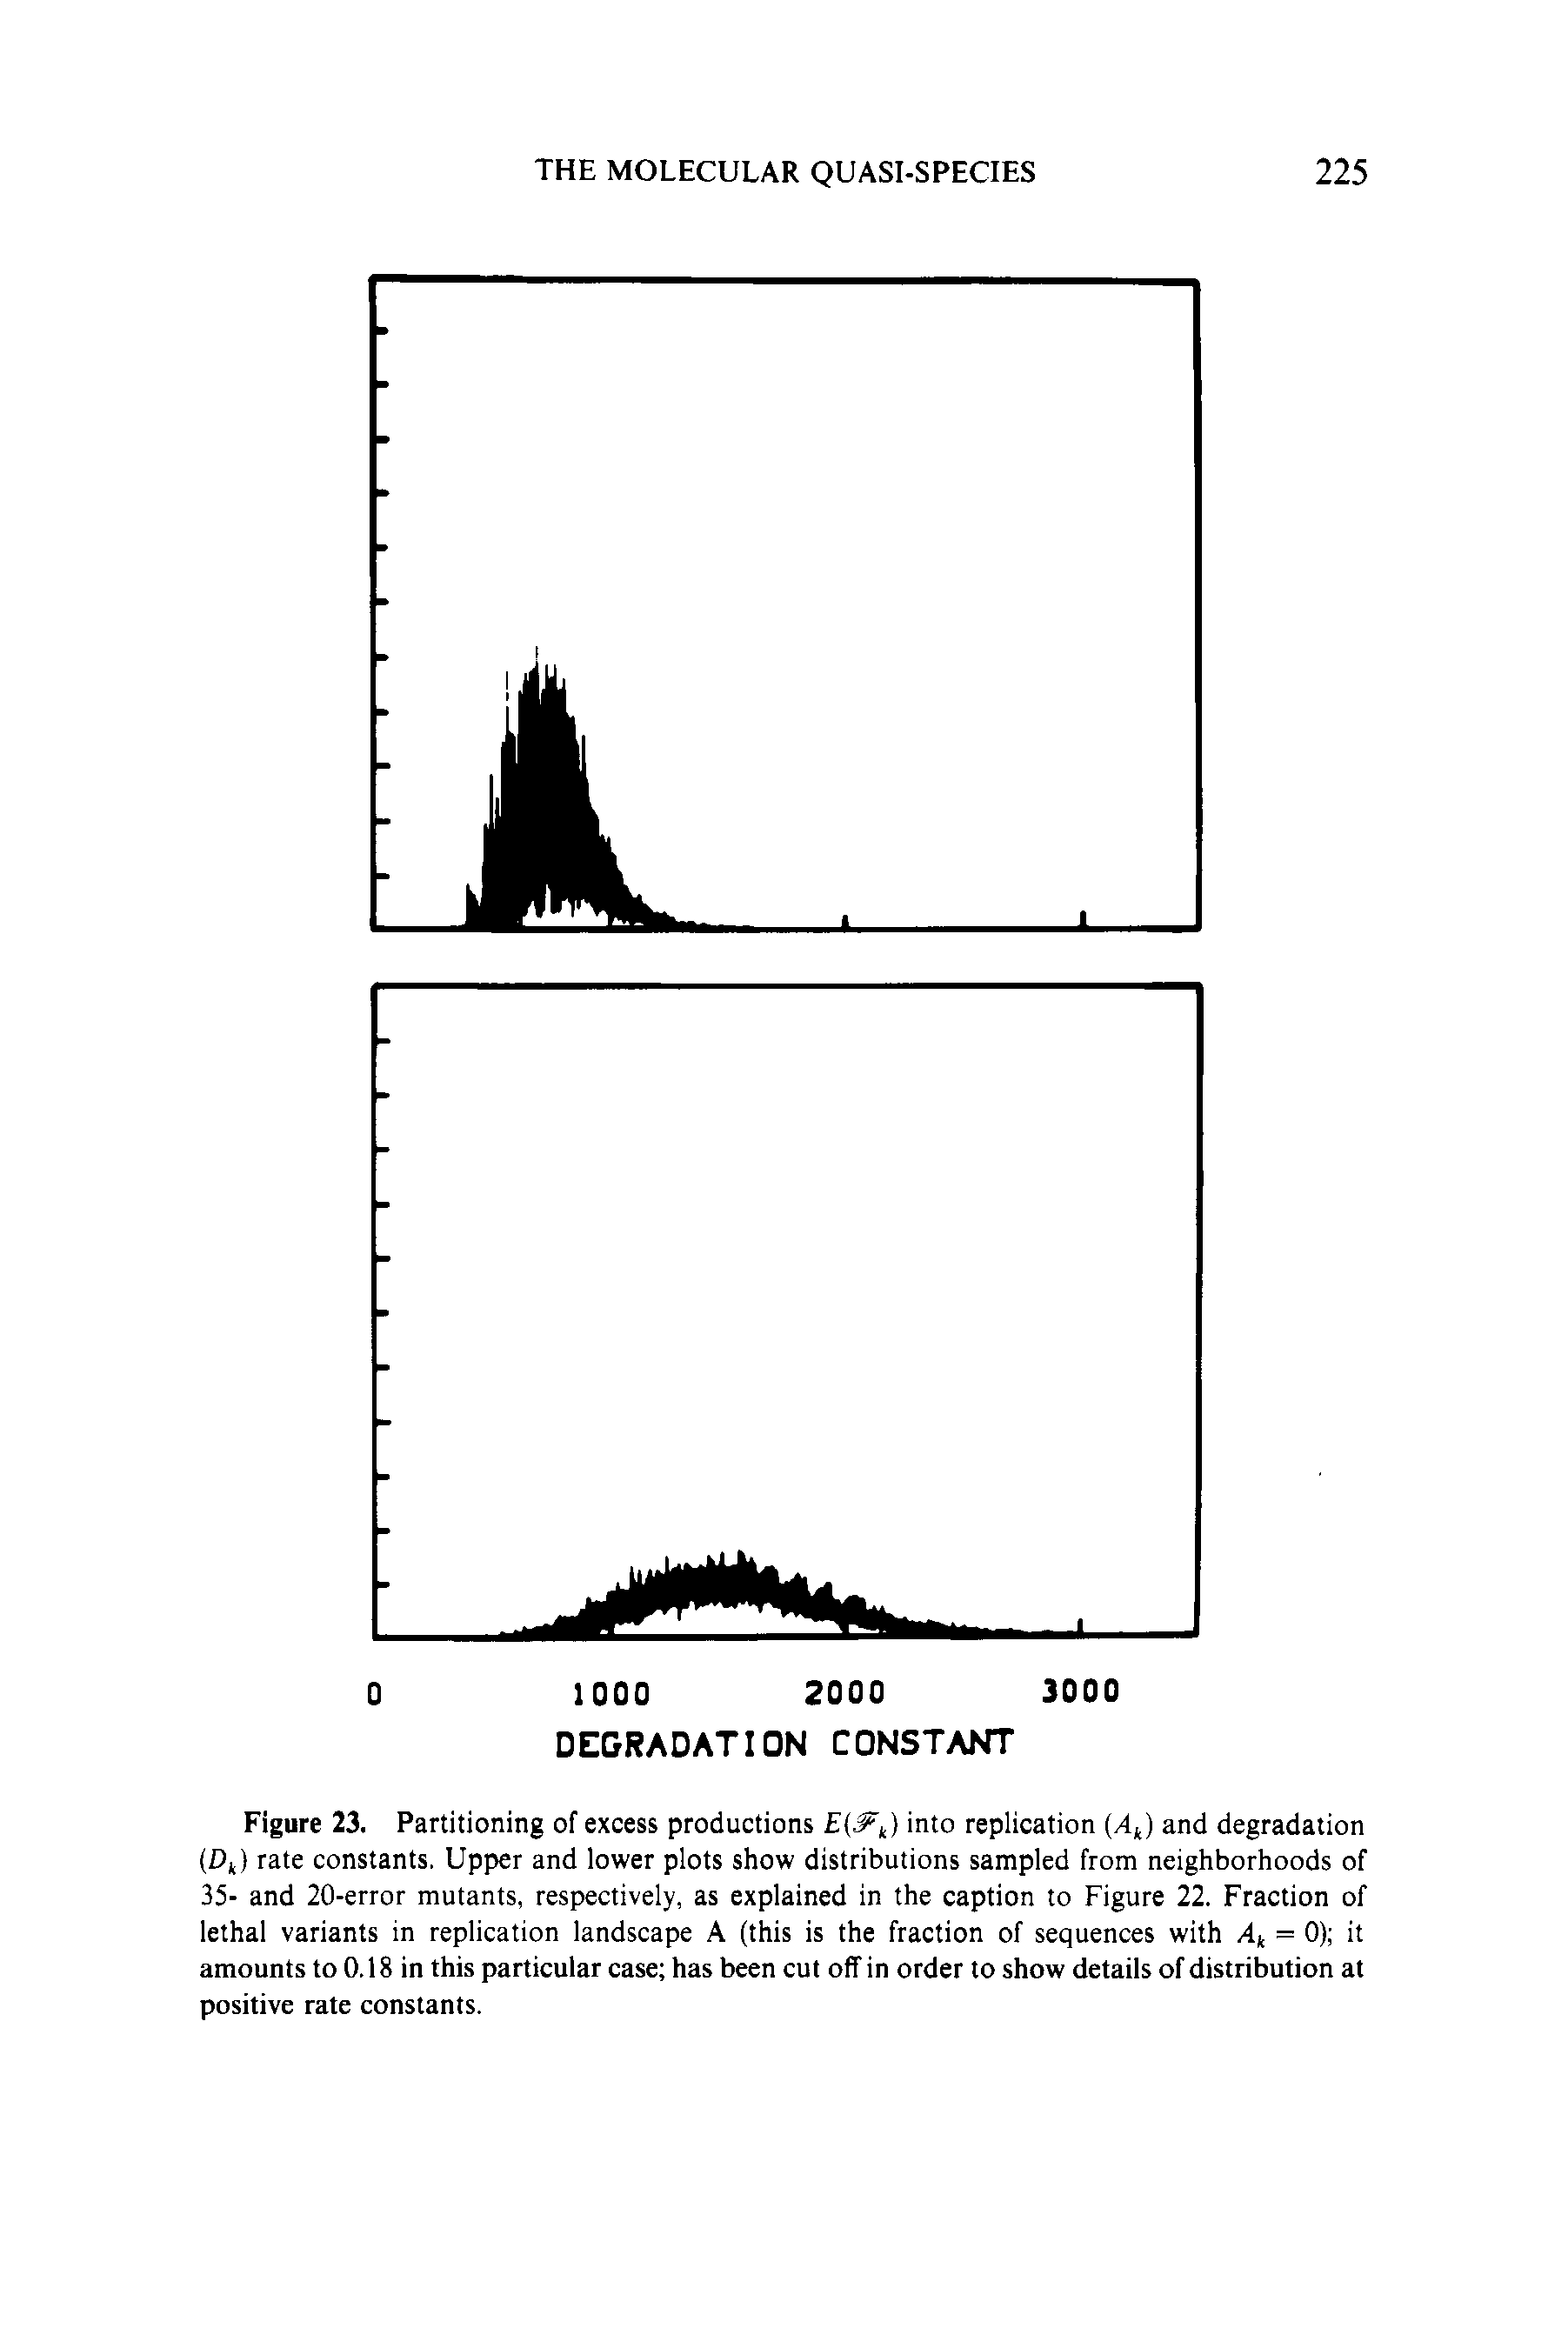 Figure 23. Partitioning of excess productions E t) into replication (Aj) and degradation (Dj) rate constants. Upper and lower plots show distributions sampled from neighborhoods of 35- and 20-error mutants, respectively, as explained in the caption to Figure 22. Fraction of lethal variants in replication landscape A (this is the fraction of sequences with = 0) it amounts to 0.18 in this particular case has been cut off in order to show details of distribution at positive rate constants.